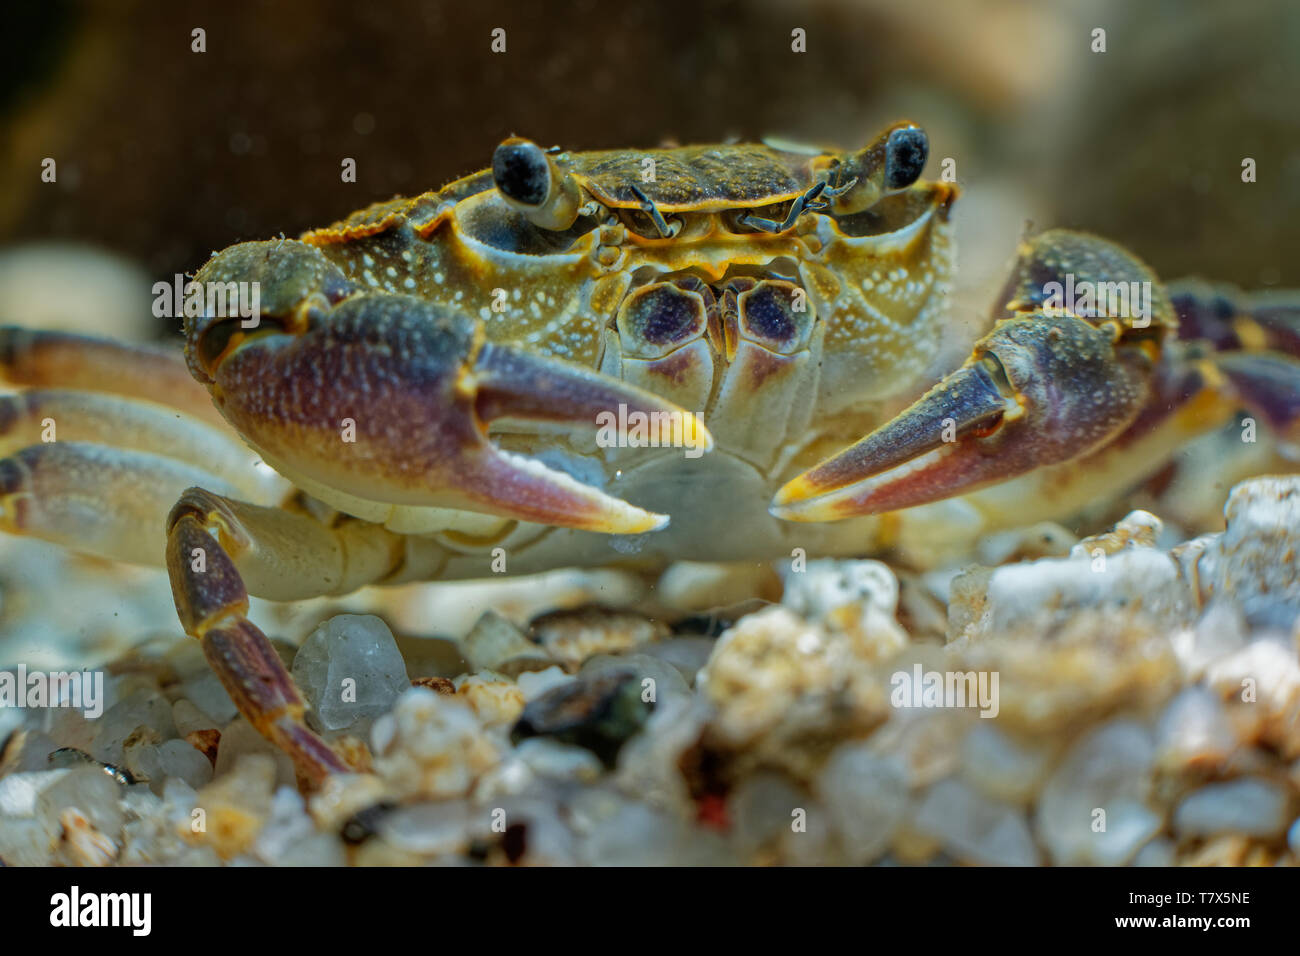 Freshwater Crab - Potamon fluviatile living in wooded streams, rivers and lakes in Southern Europe. Stock Photo